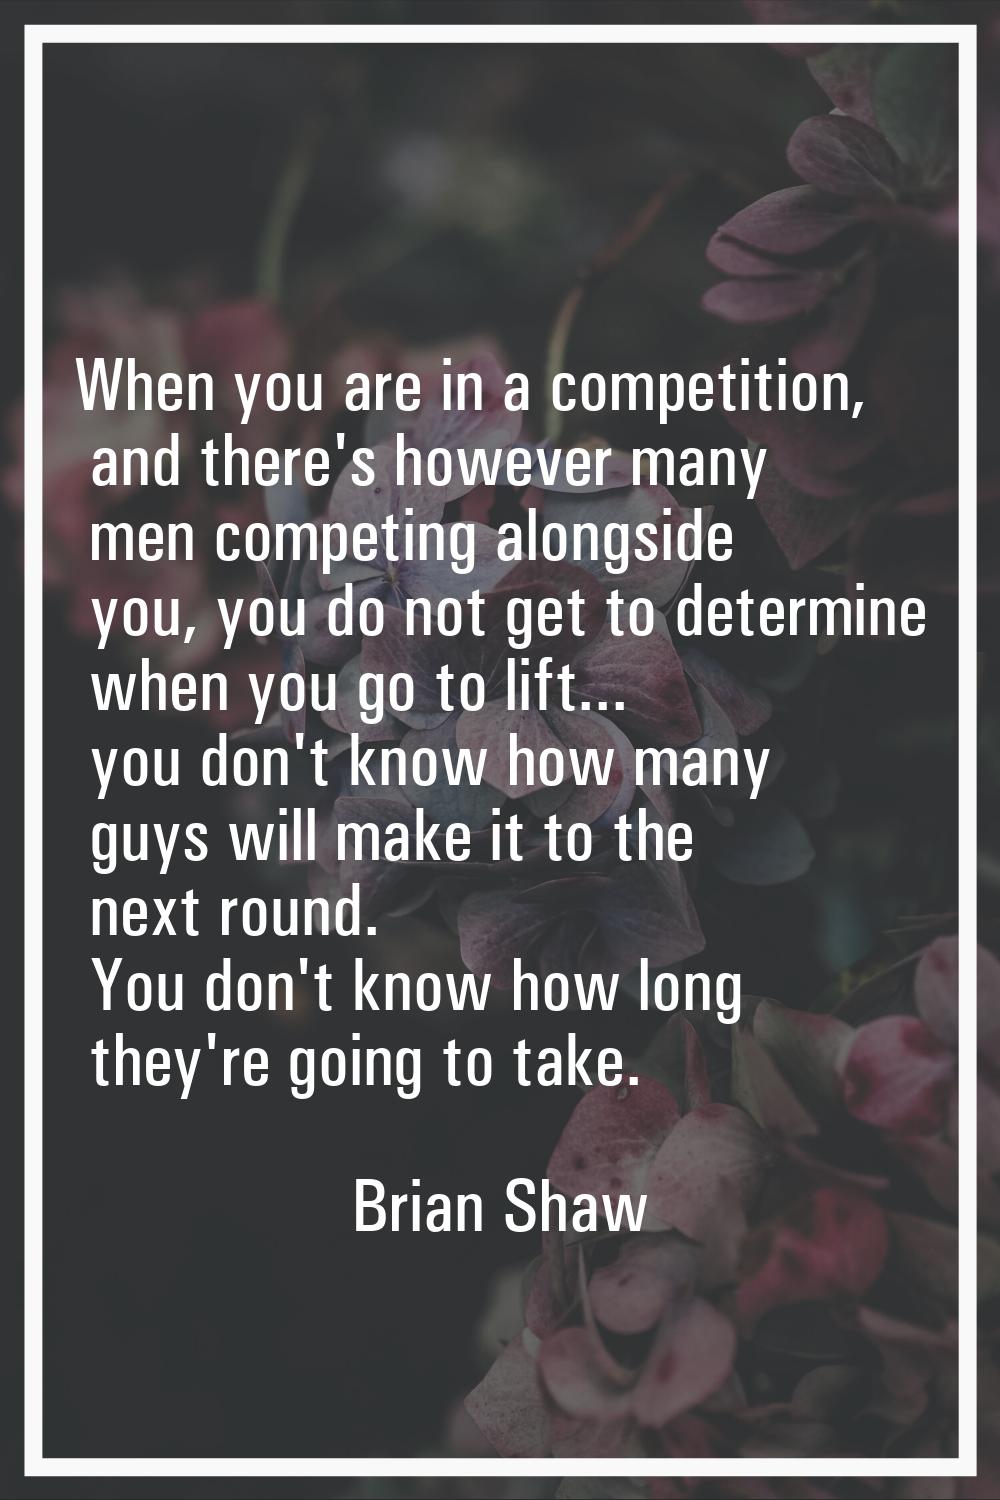 When you are in a competition, and there's however many men competing alongside you, you do not get